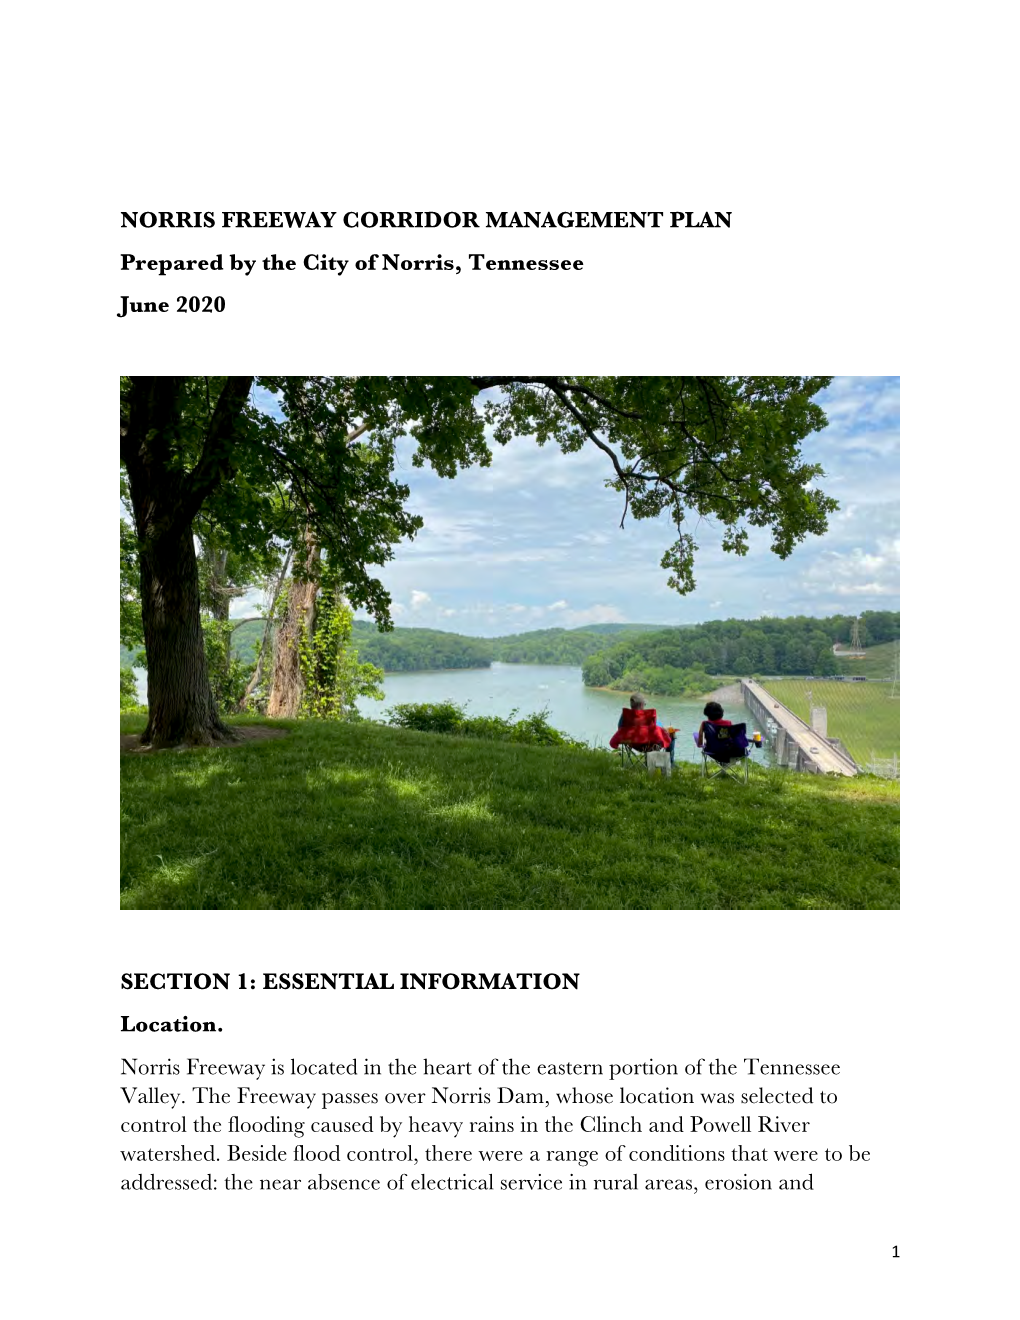 NORRIS FREEWAY CORRIDOR MANAGEMENT PLAN Prepared by the City of Norris, Tennessee June 2020 SECTION 1: ESSENTIAL INFORMATION